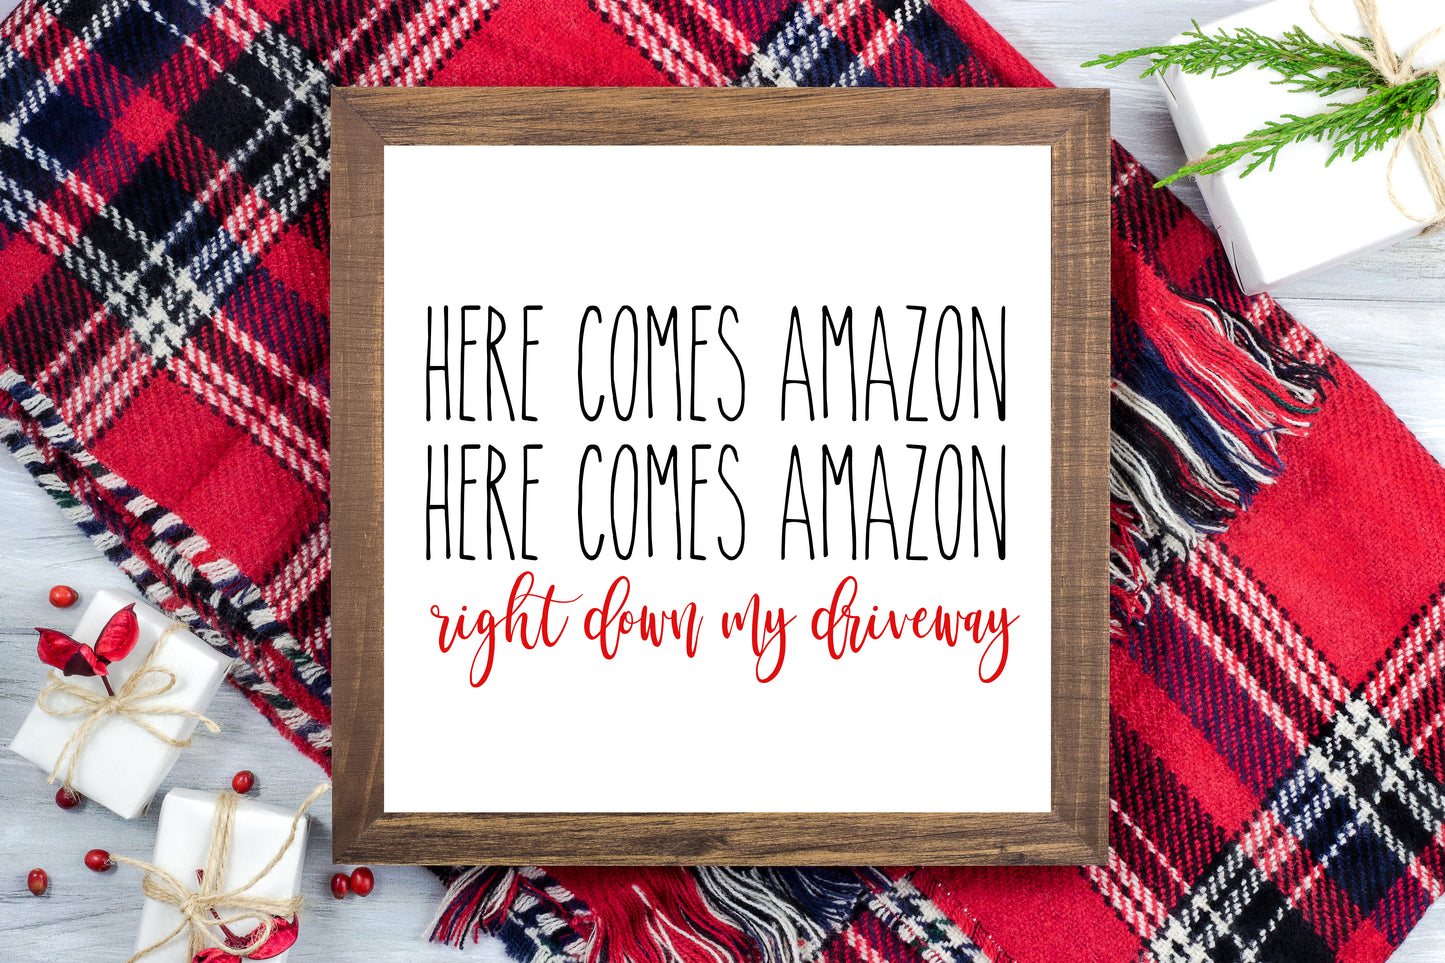 Here comes Amazon, Here comes Amazon, right down my Driveway - Funny Christmas Printable Sign Farmhouse Style  - Digital File